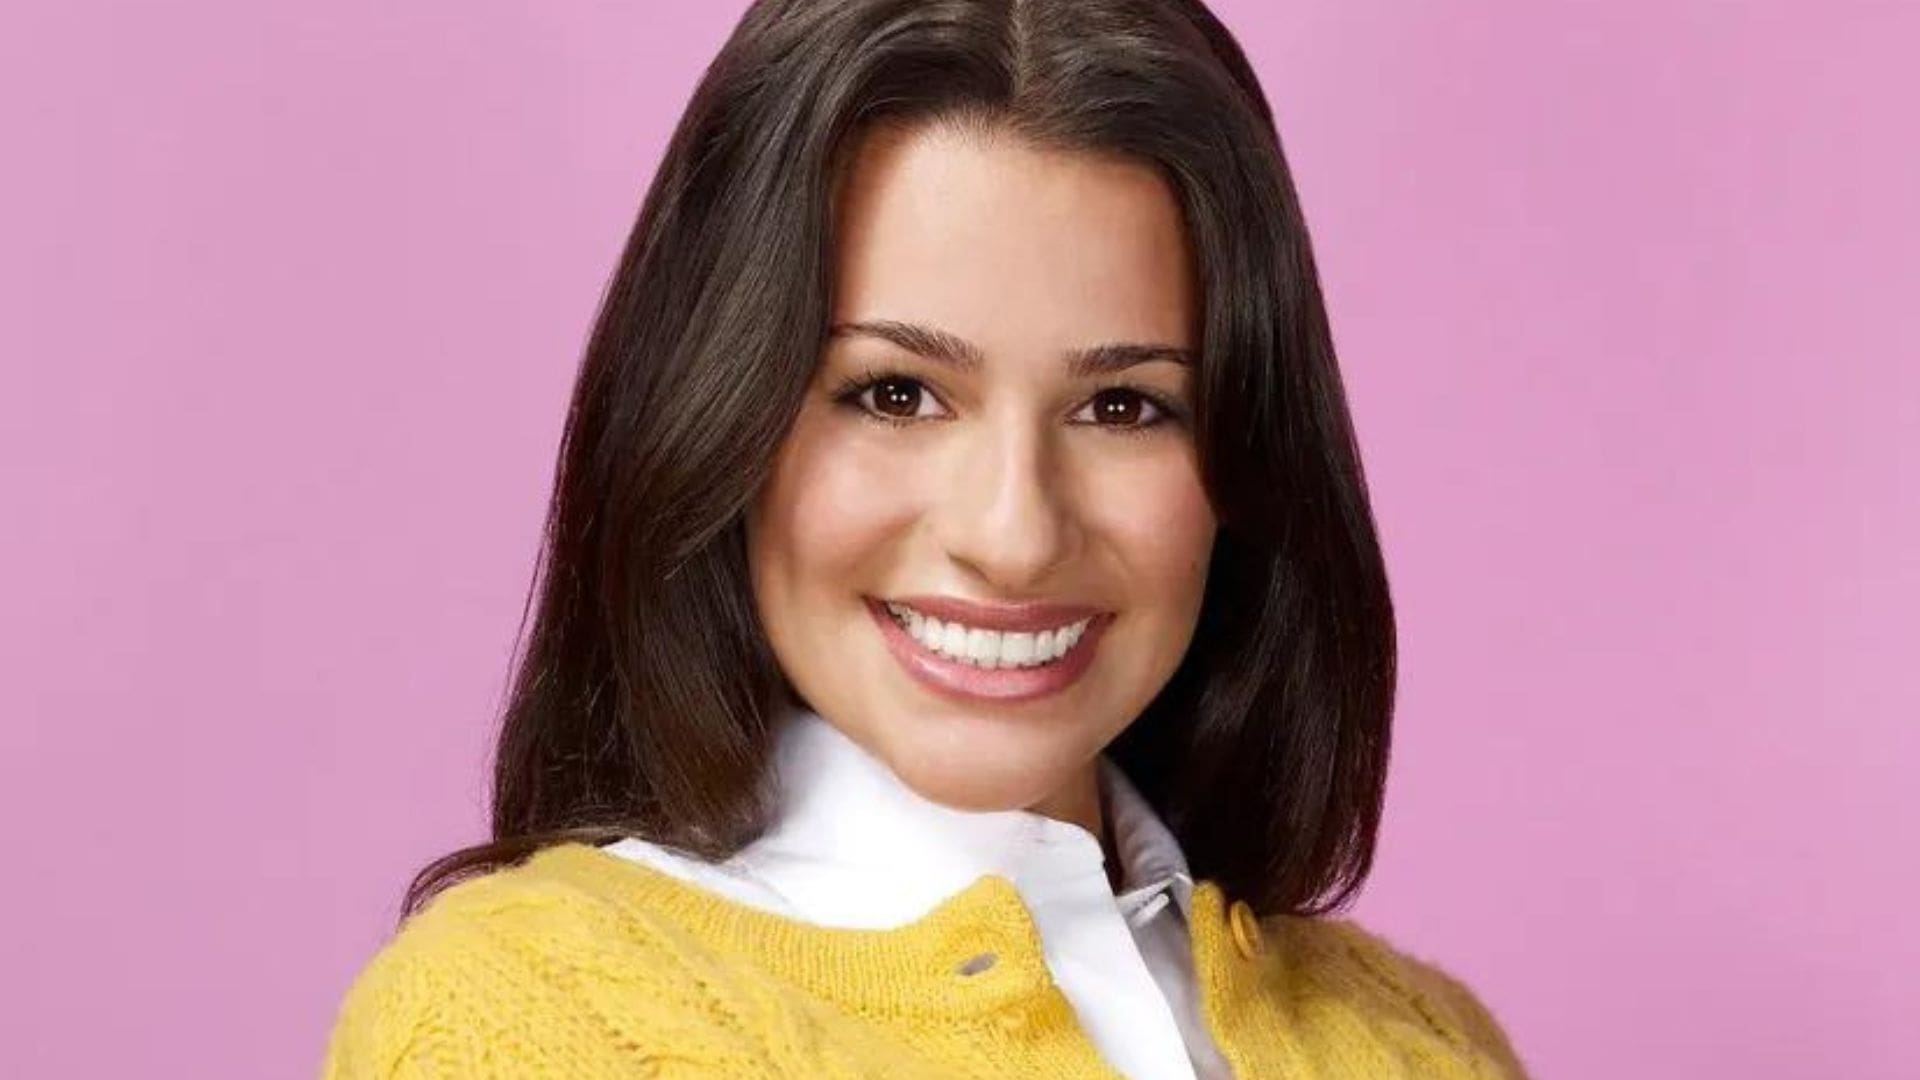 Lea Michele Glee - Why Does The Internet Hate Lea Michele From Glee?